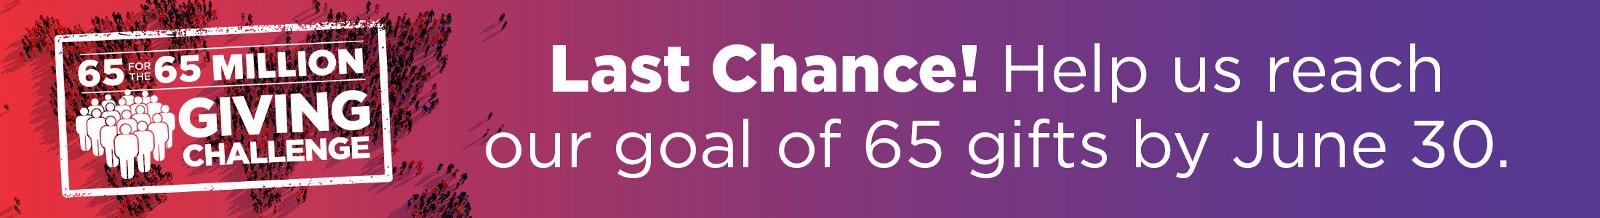 65 for the 65 Million Giving Challenge - Last Chance! Help us reach our goal of 654 gifts by June 30.